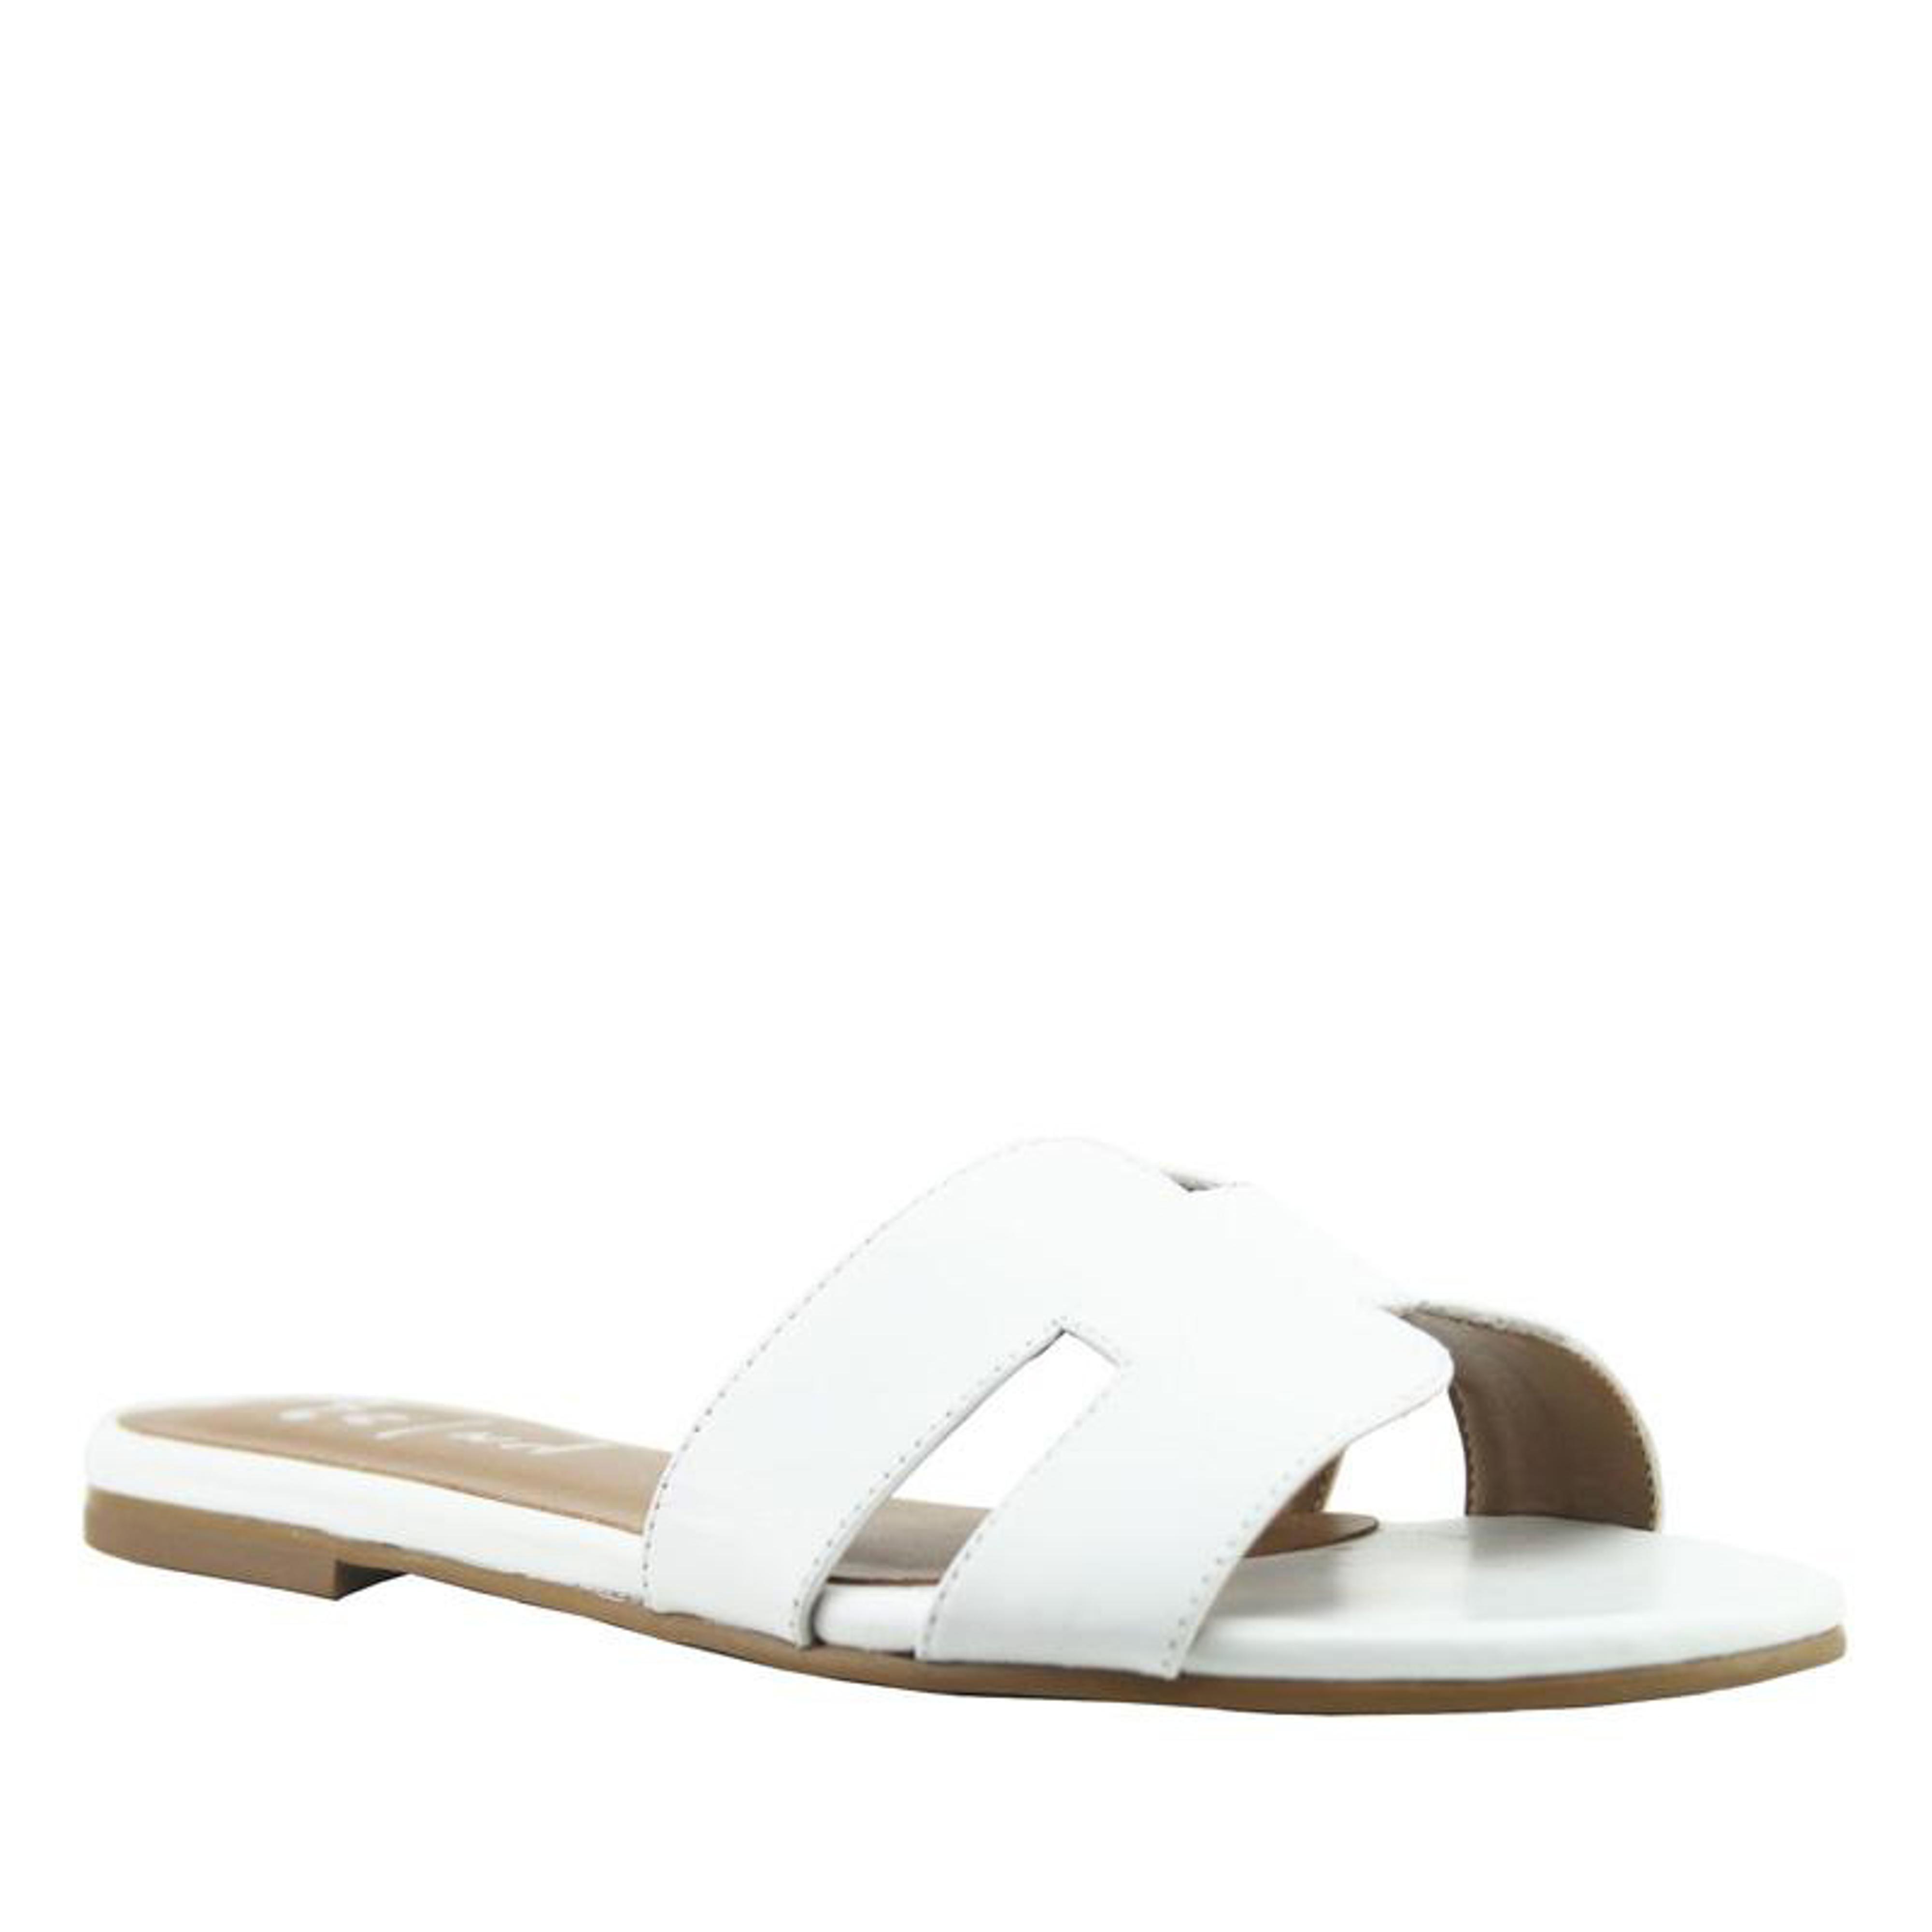 Share 194+ french sole alibi sandals